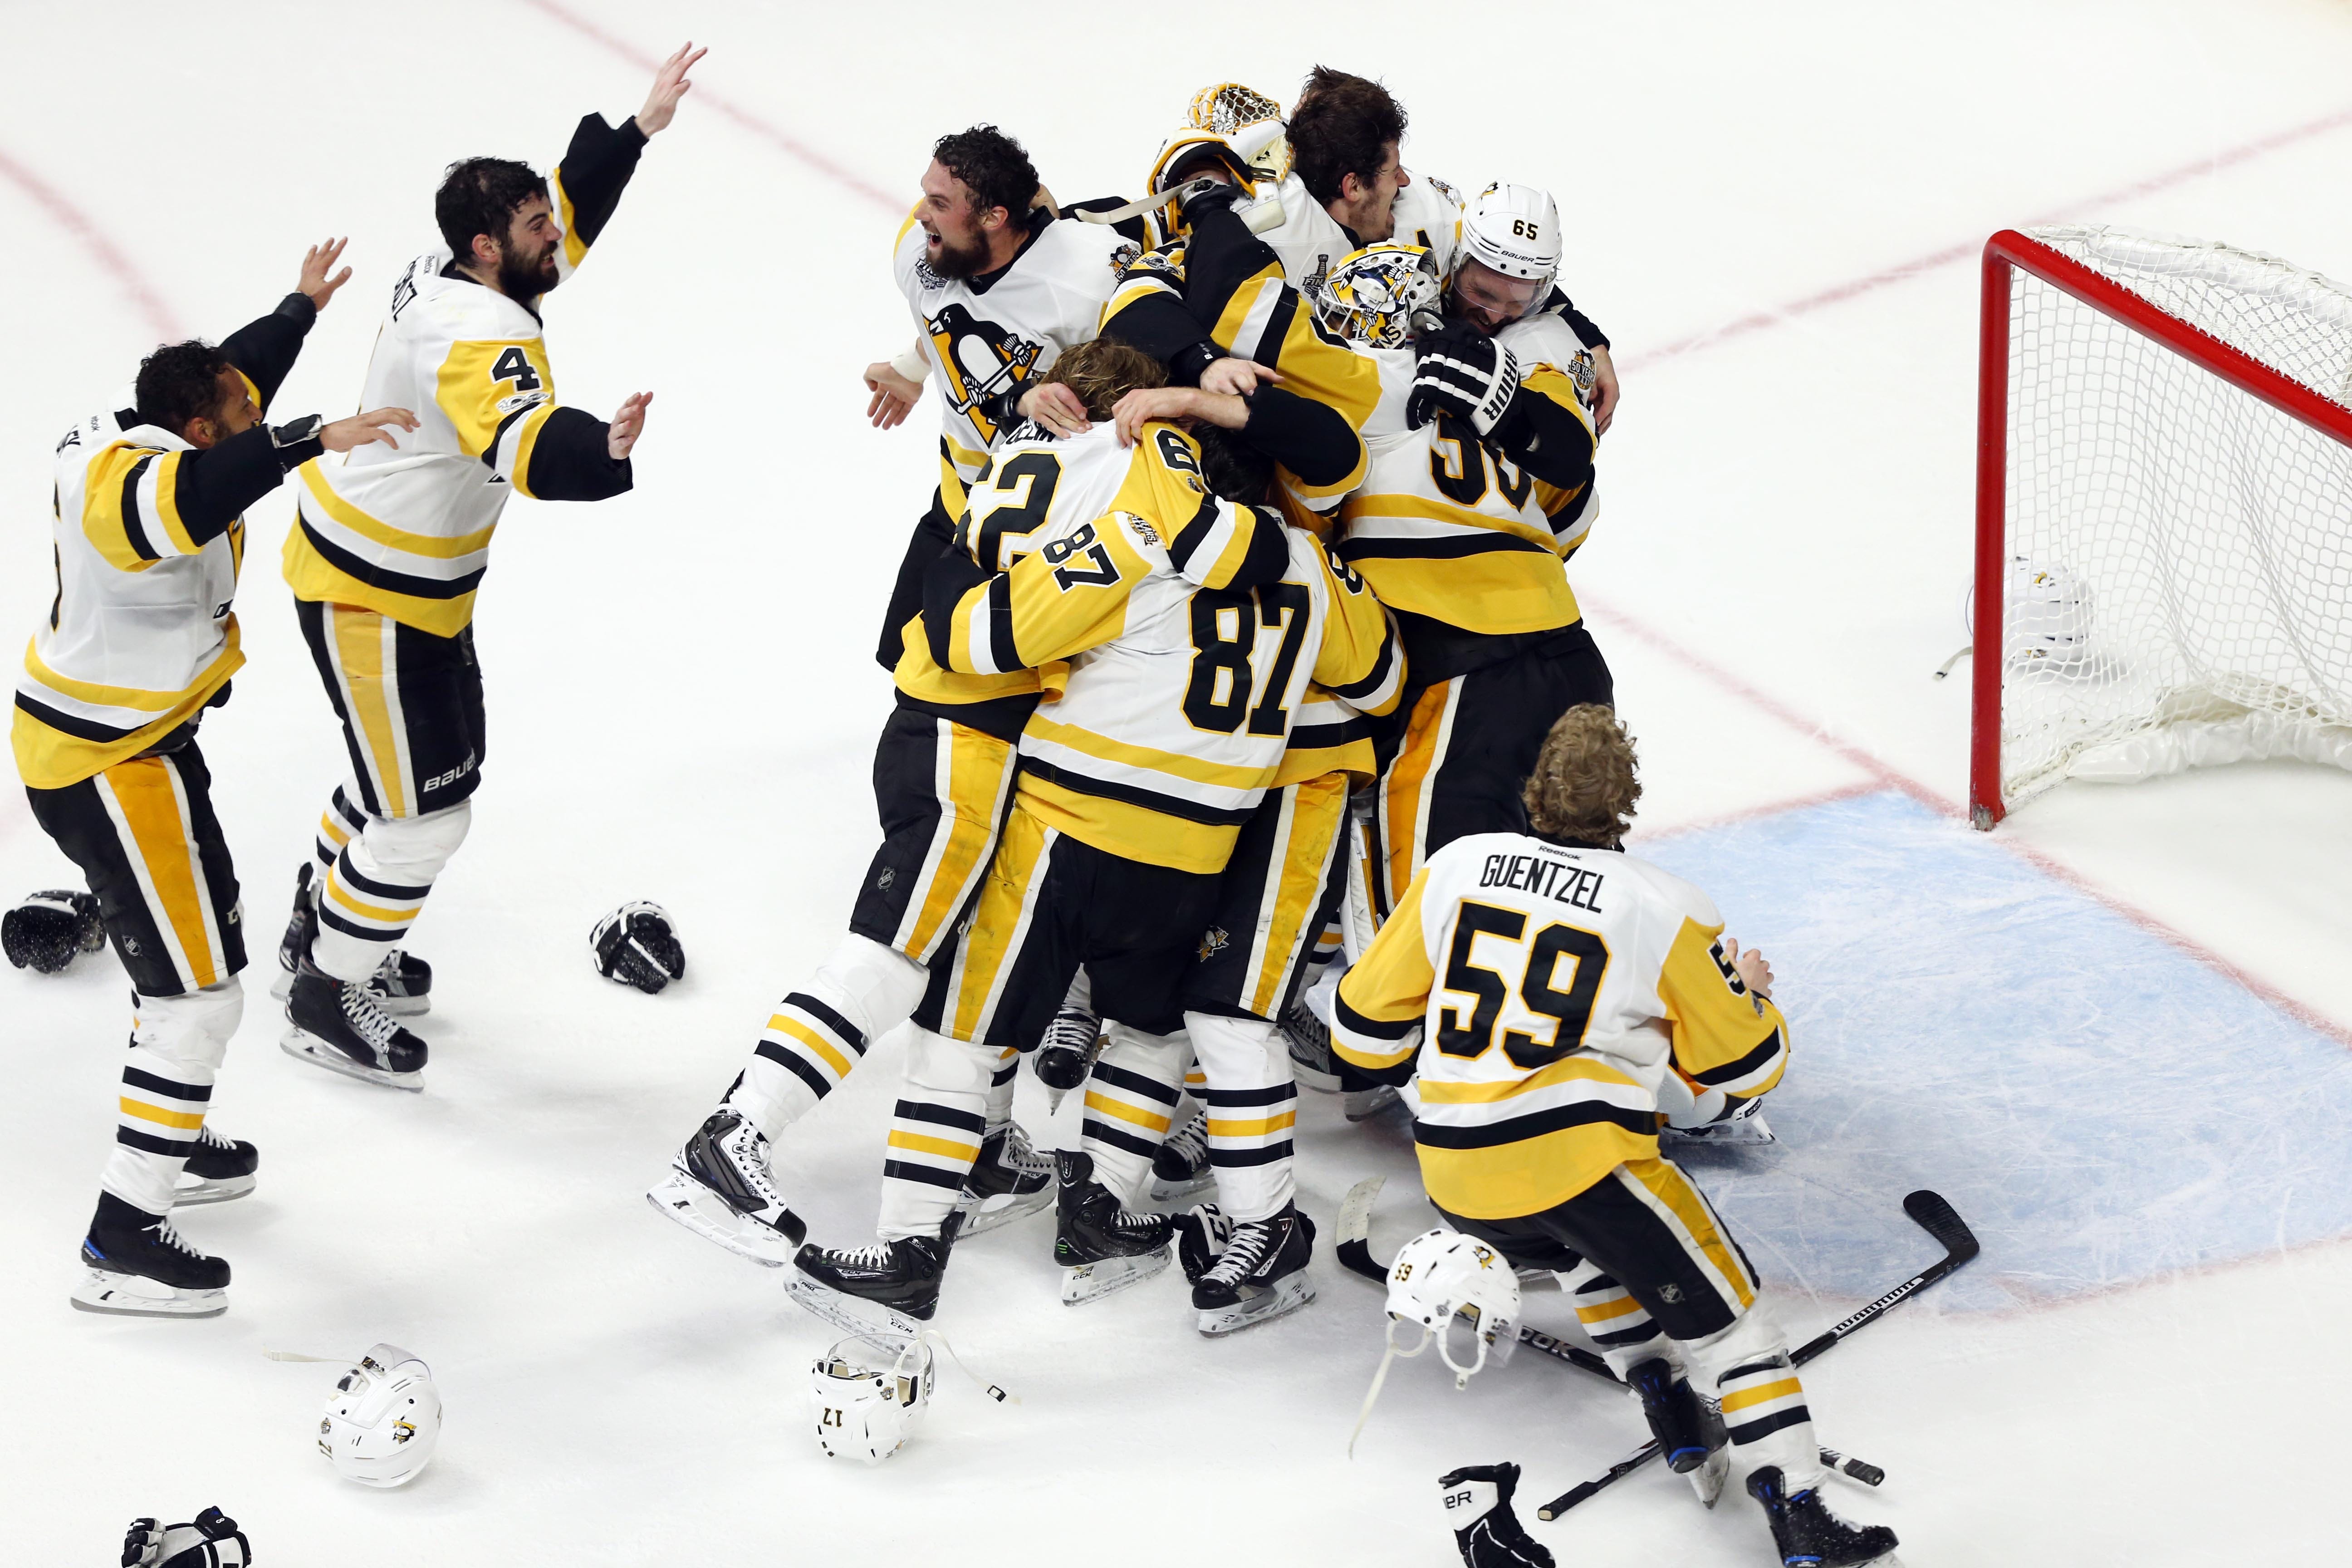 Penguins have become NHL's newest dynasty